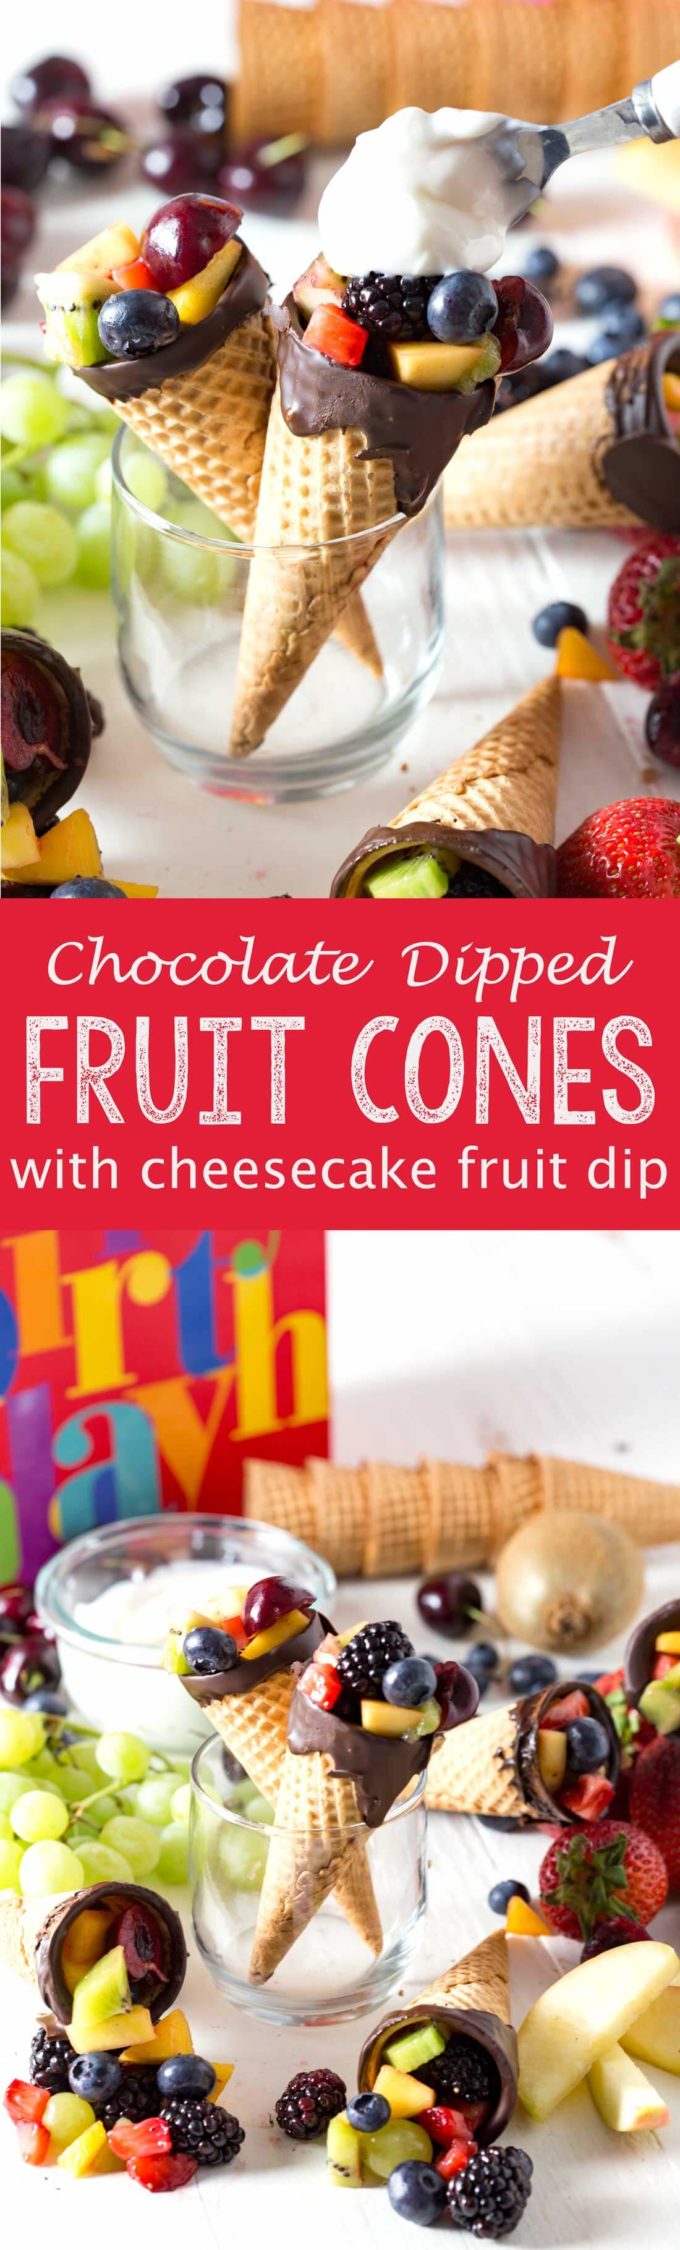 Chocolate dipped fruit cones with a cheesecake fruit dip that is light, fluffy, and delicious